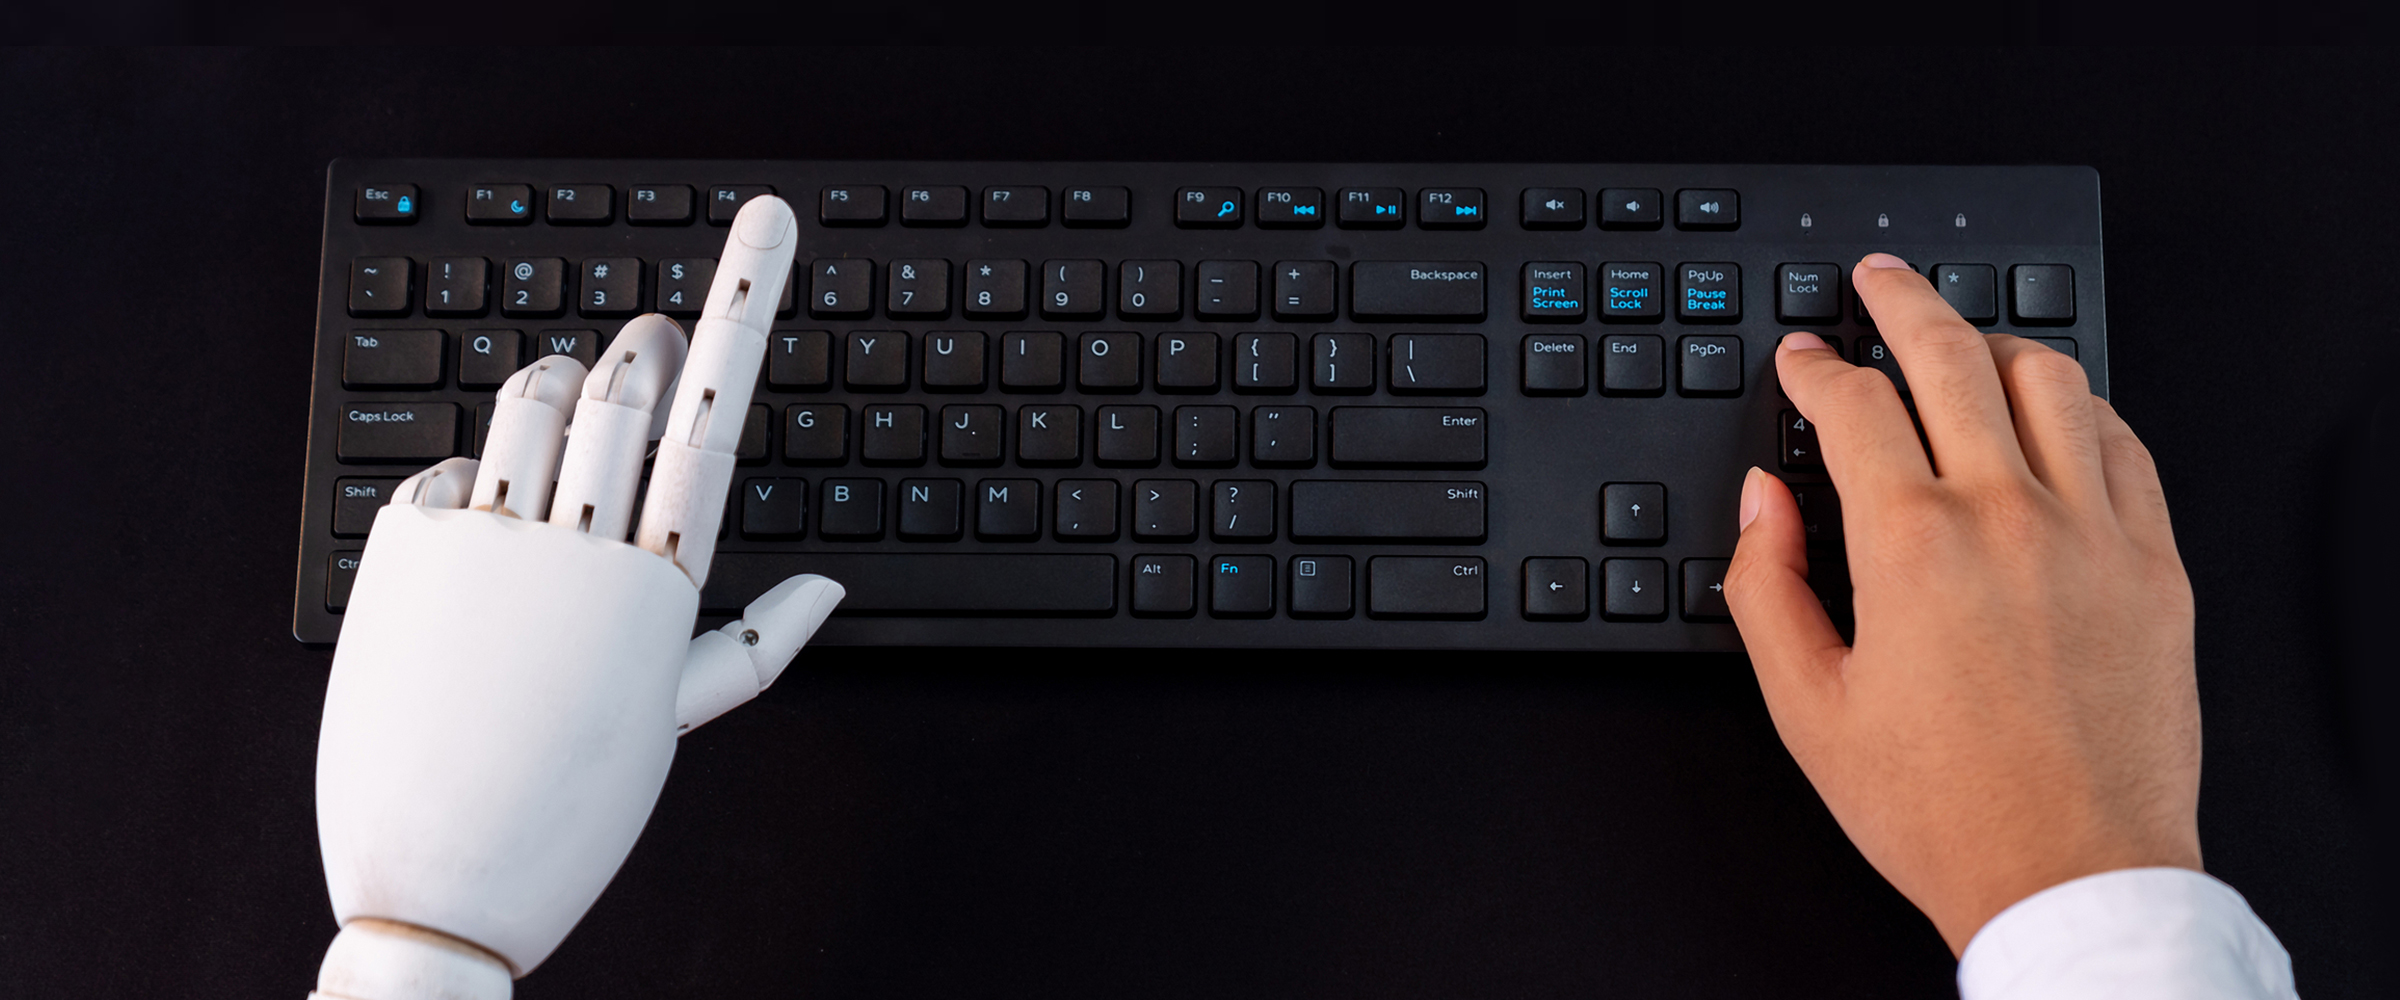 Overhead view of black keyboard with robotic left hand and human right hand